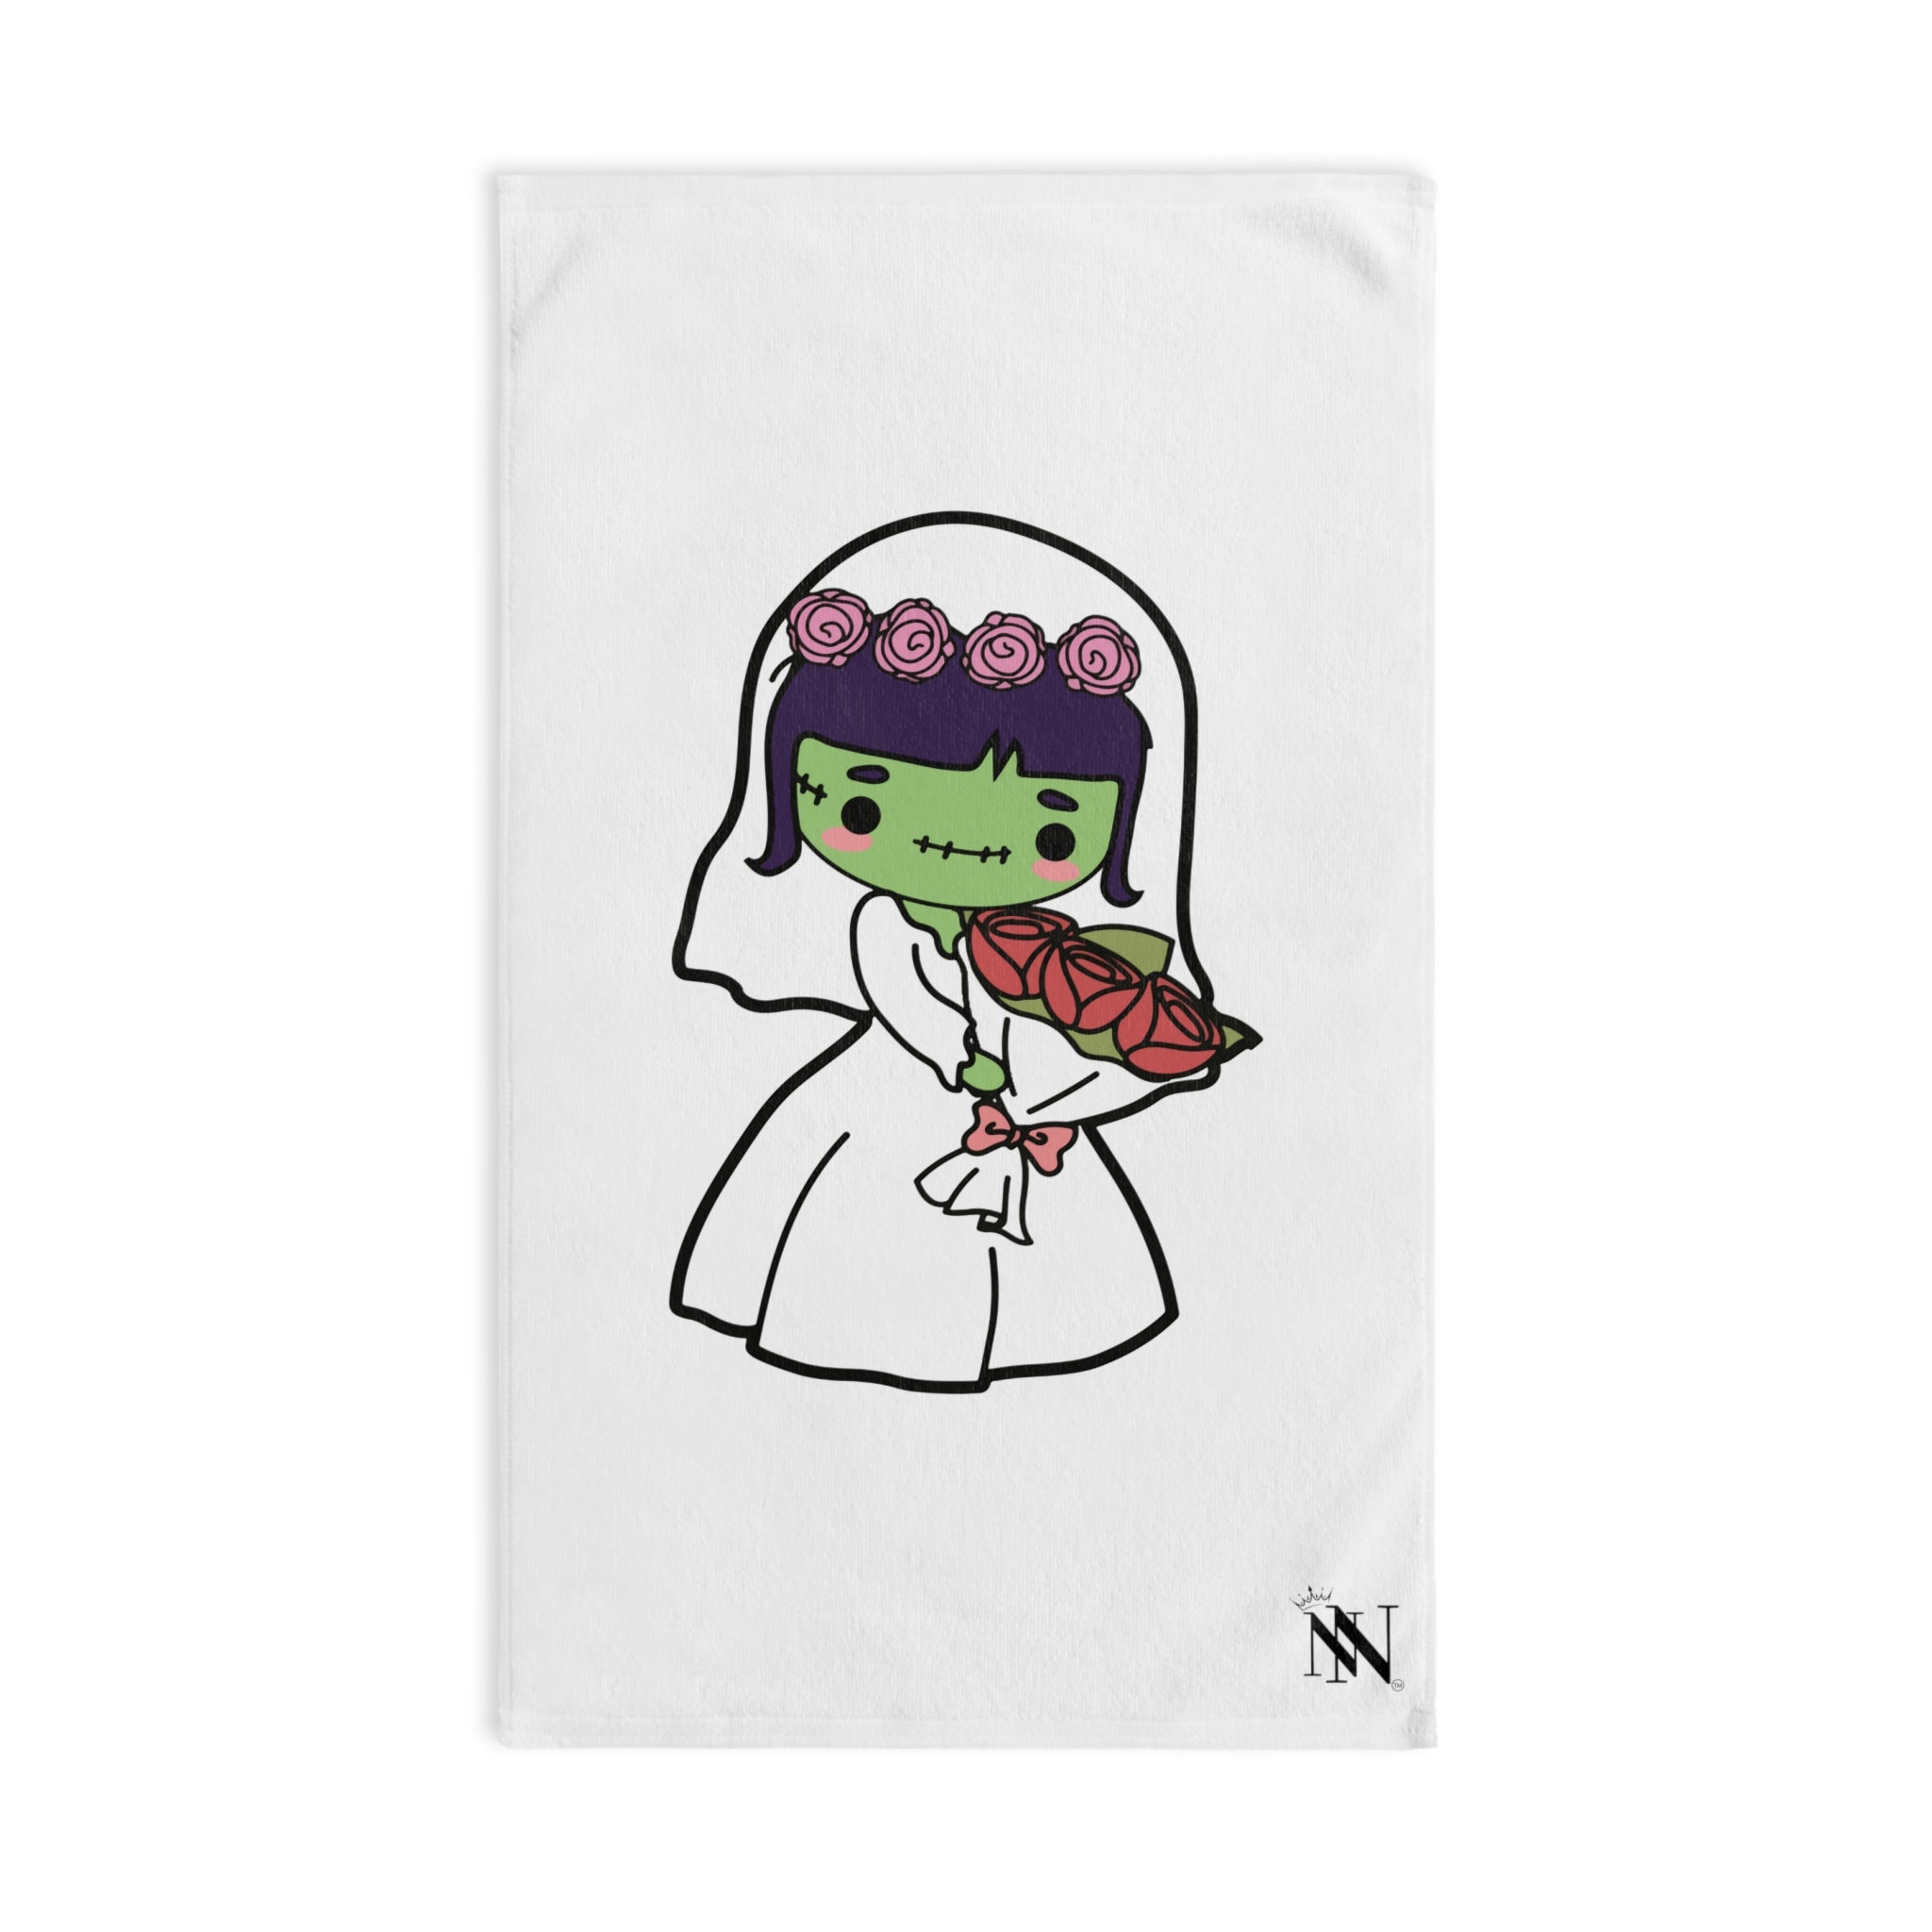 Zombie Bride White | Funny Gifts for Men - Gifts for Him - Birthday Gifts for Men, Him, Her, Husband, Boyfriend, Girlfriend, New Couple Gifts, Fathers & Valentines Day Gifts, Christmas Gifts NECTAR NAPKINS